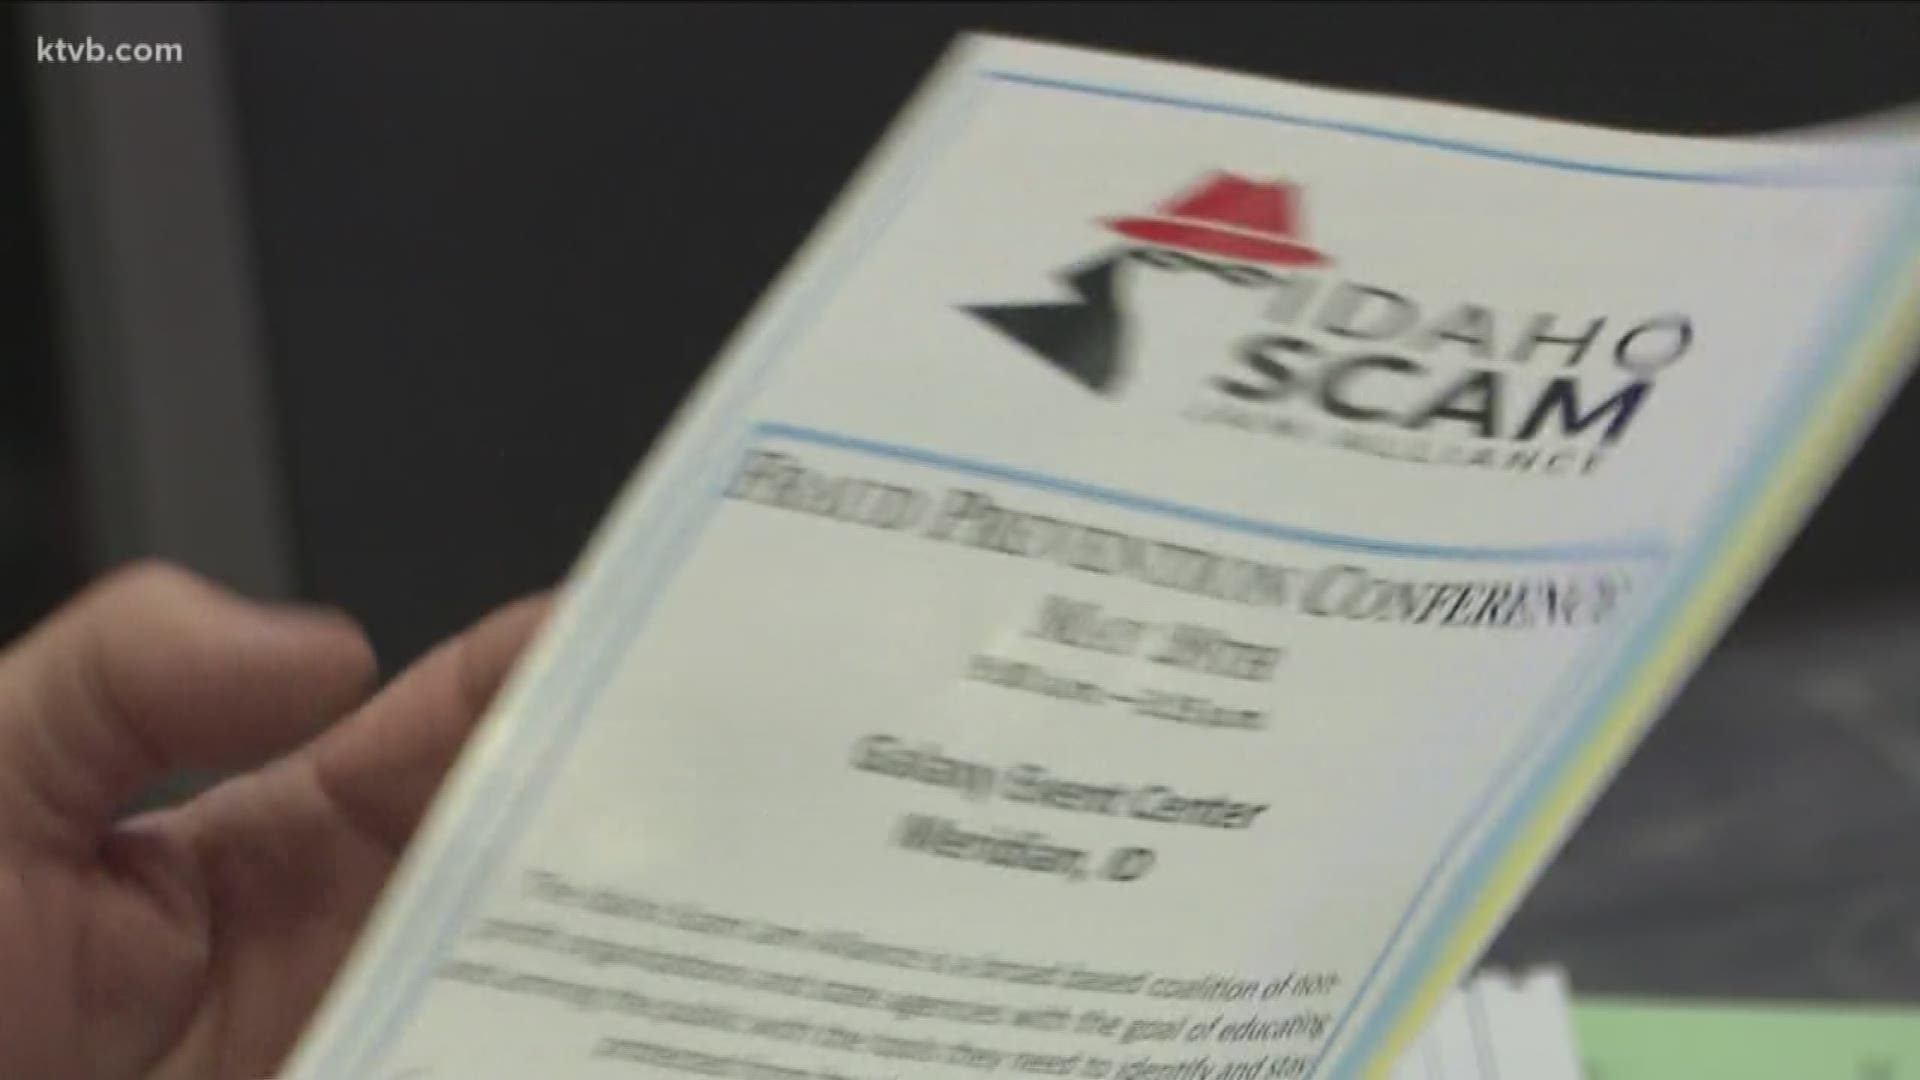 Security specialists say being aware of scams is half the battle when it comes to preventing fraud.